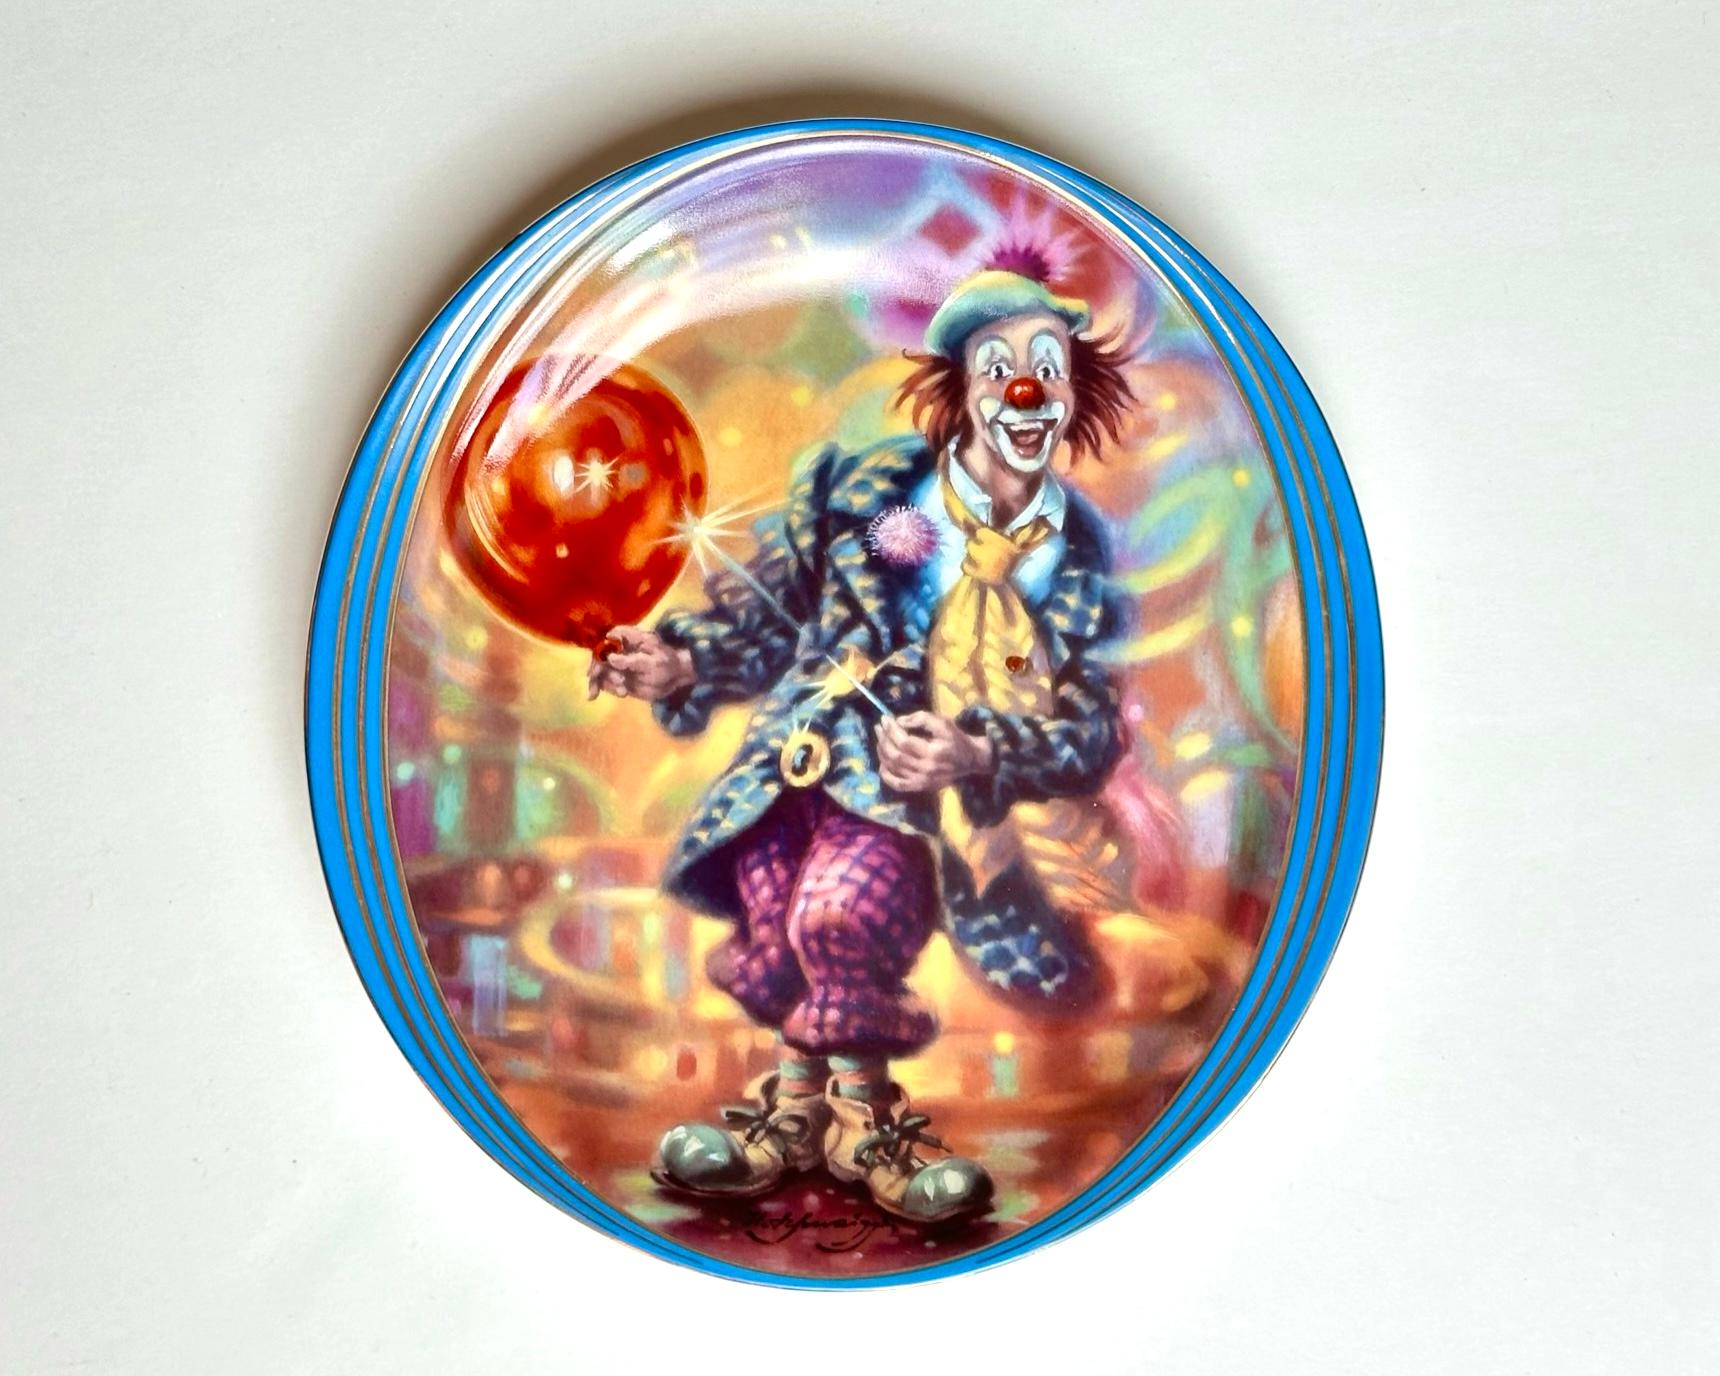 German Vintage Collectors Plate Annaburg “Impressions of a Clown” Harald Schwaiger For Sale